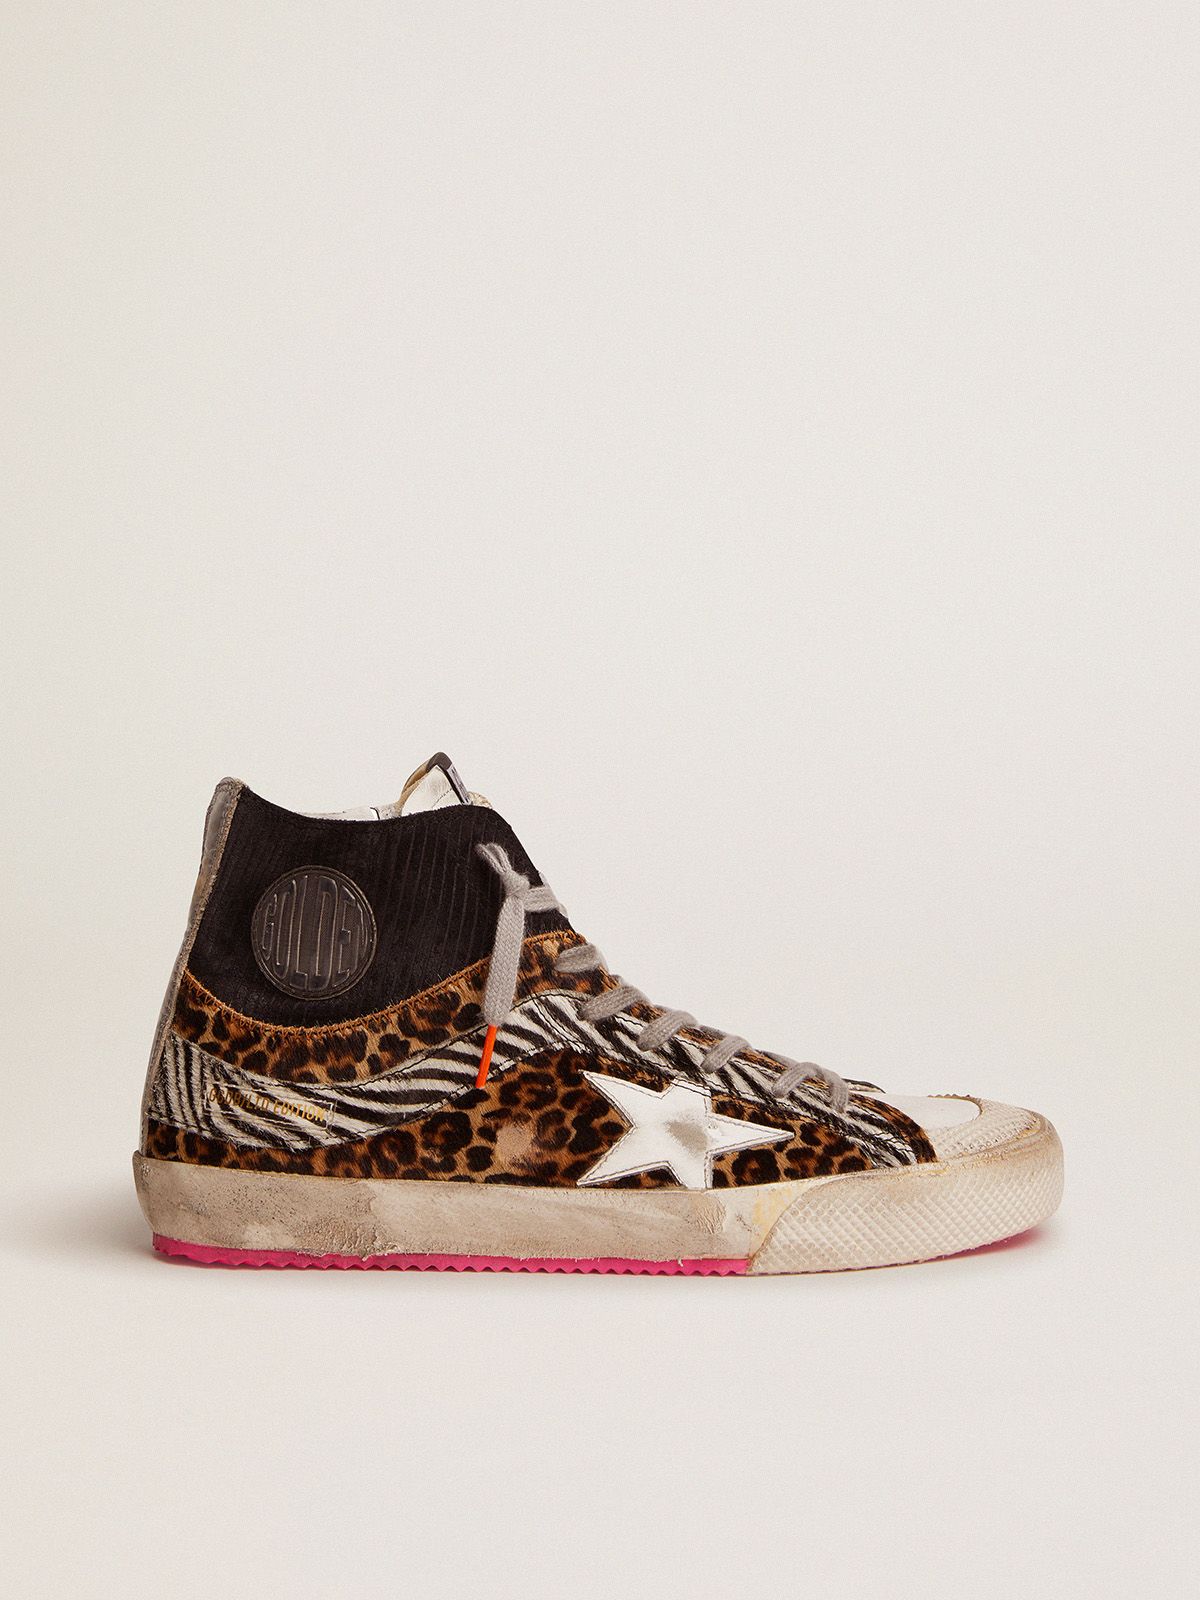 golden goose with black LAB corduroy-print skin pony suede upper Francy sneakers and